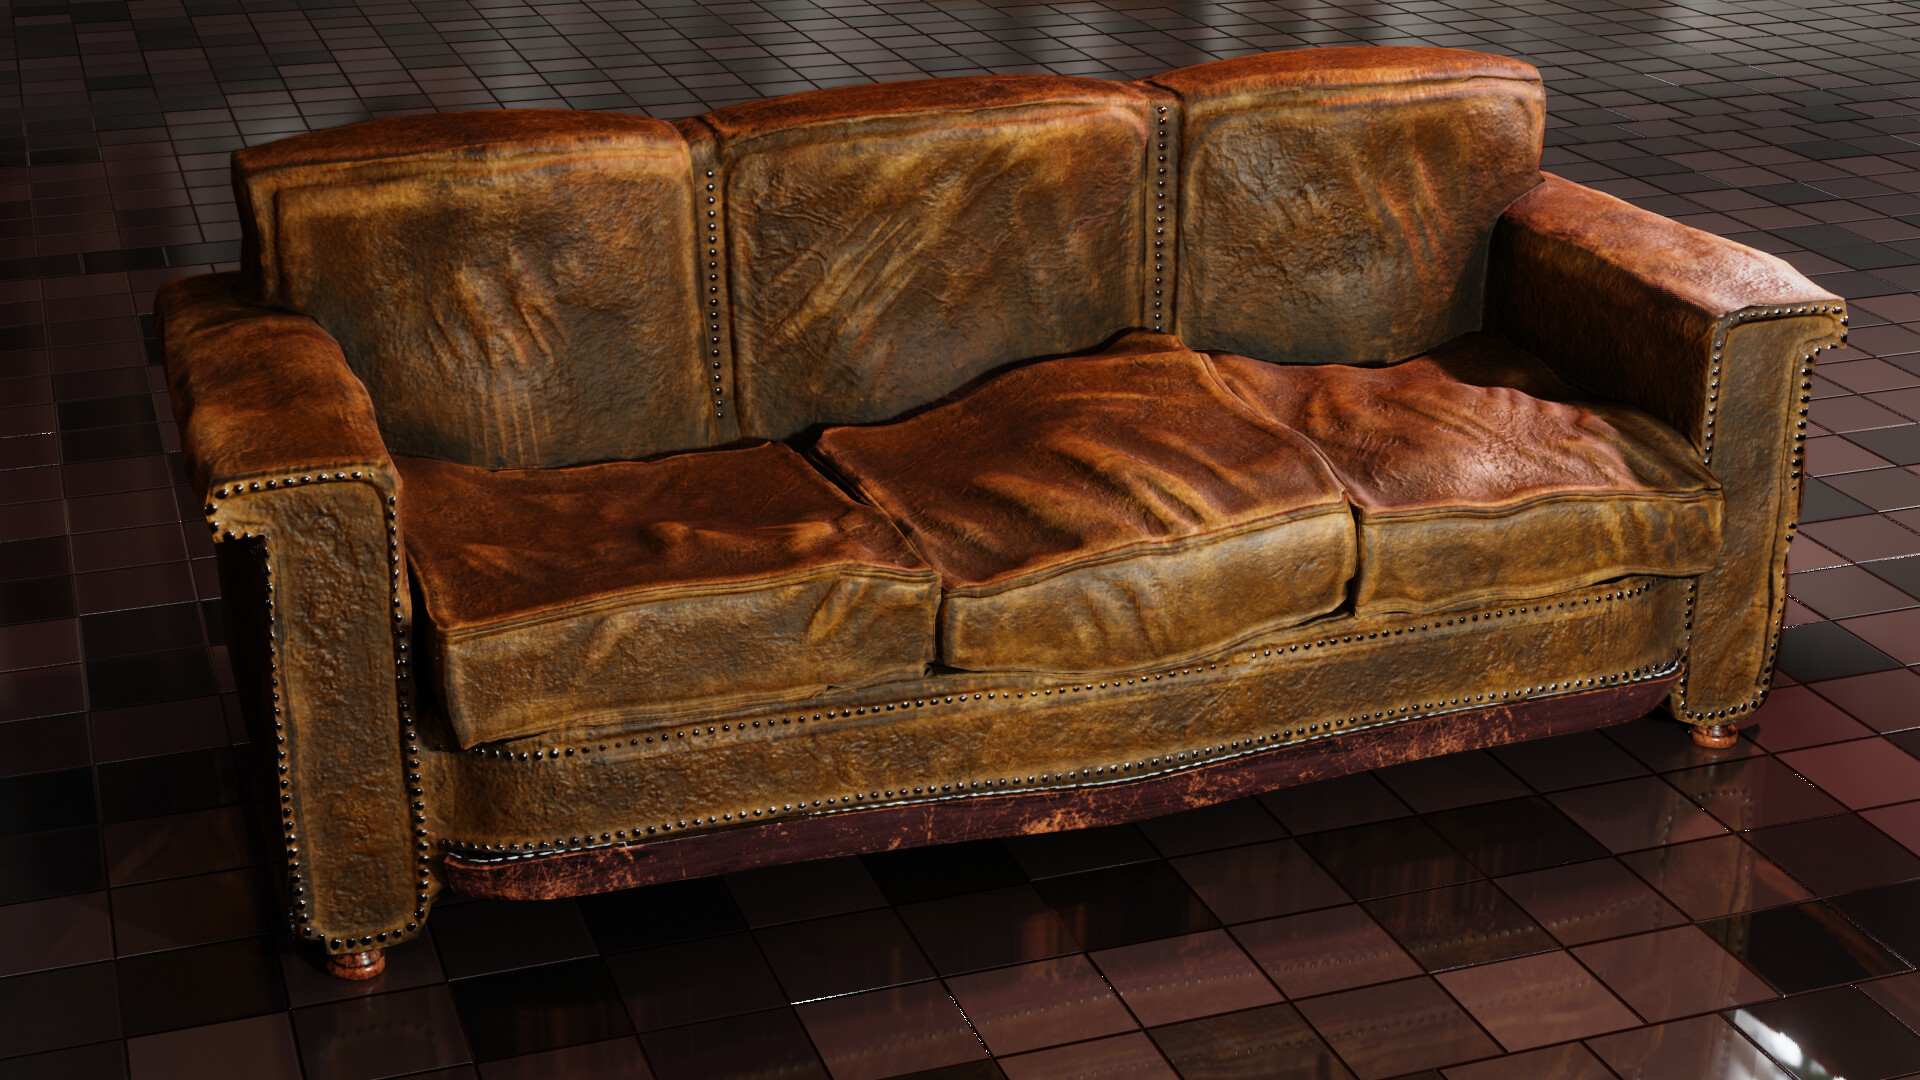 worn out leather sofa